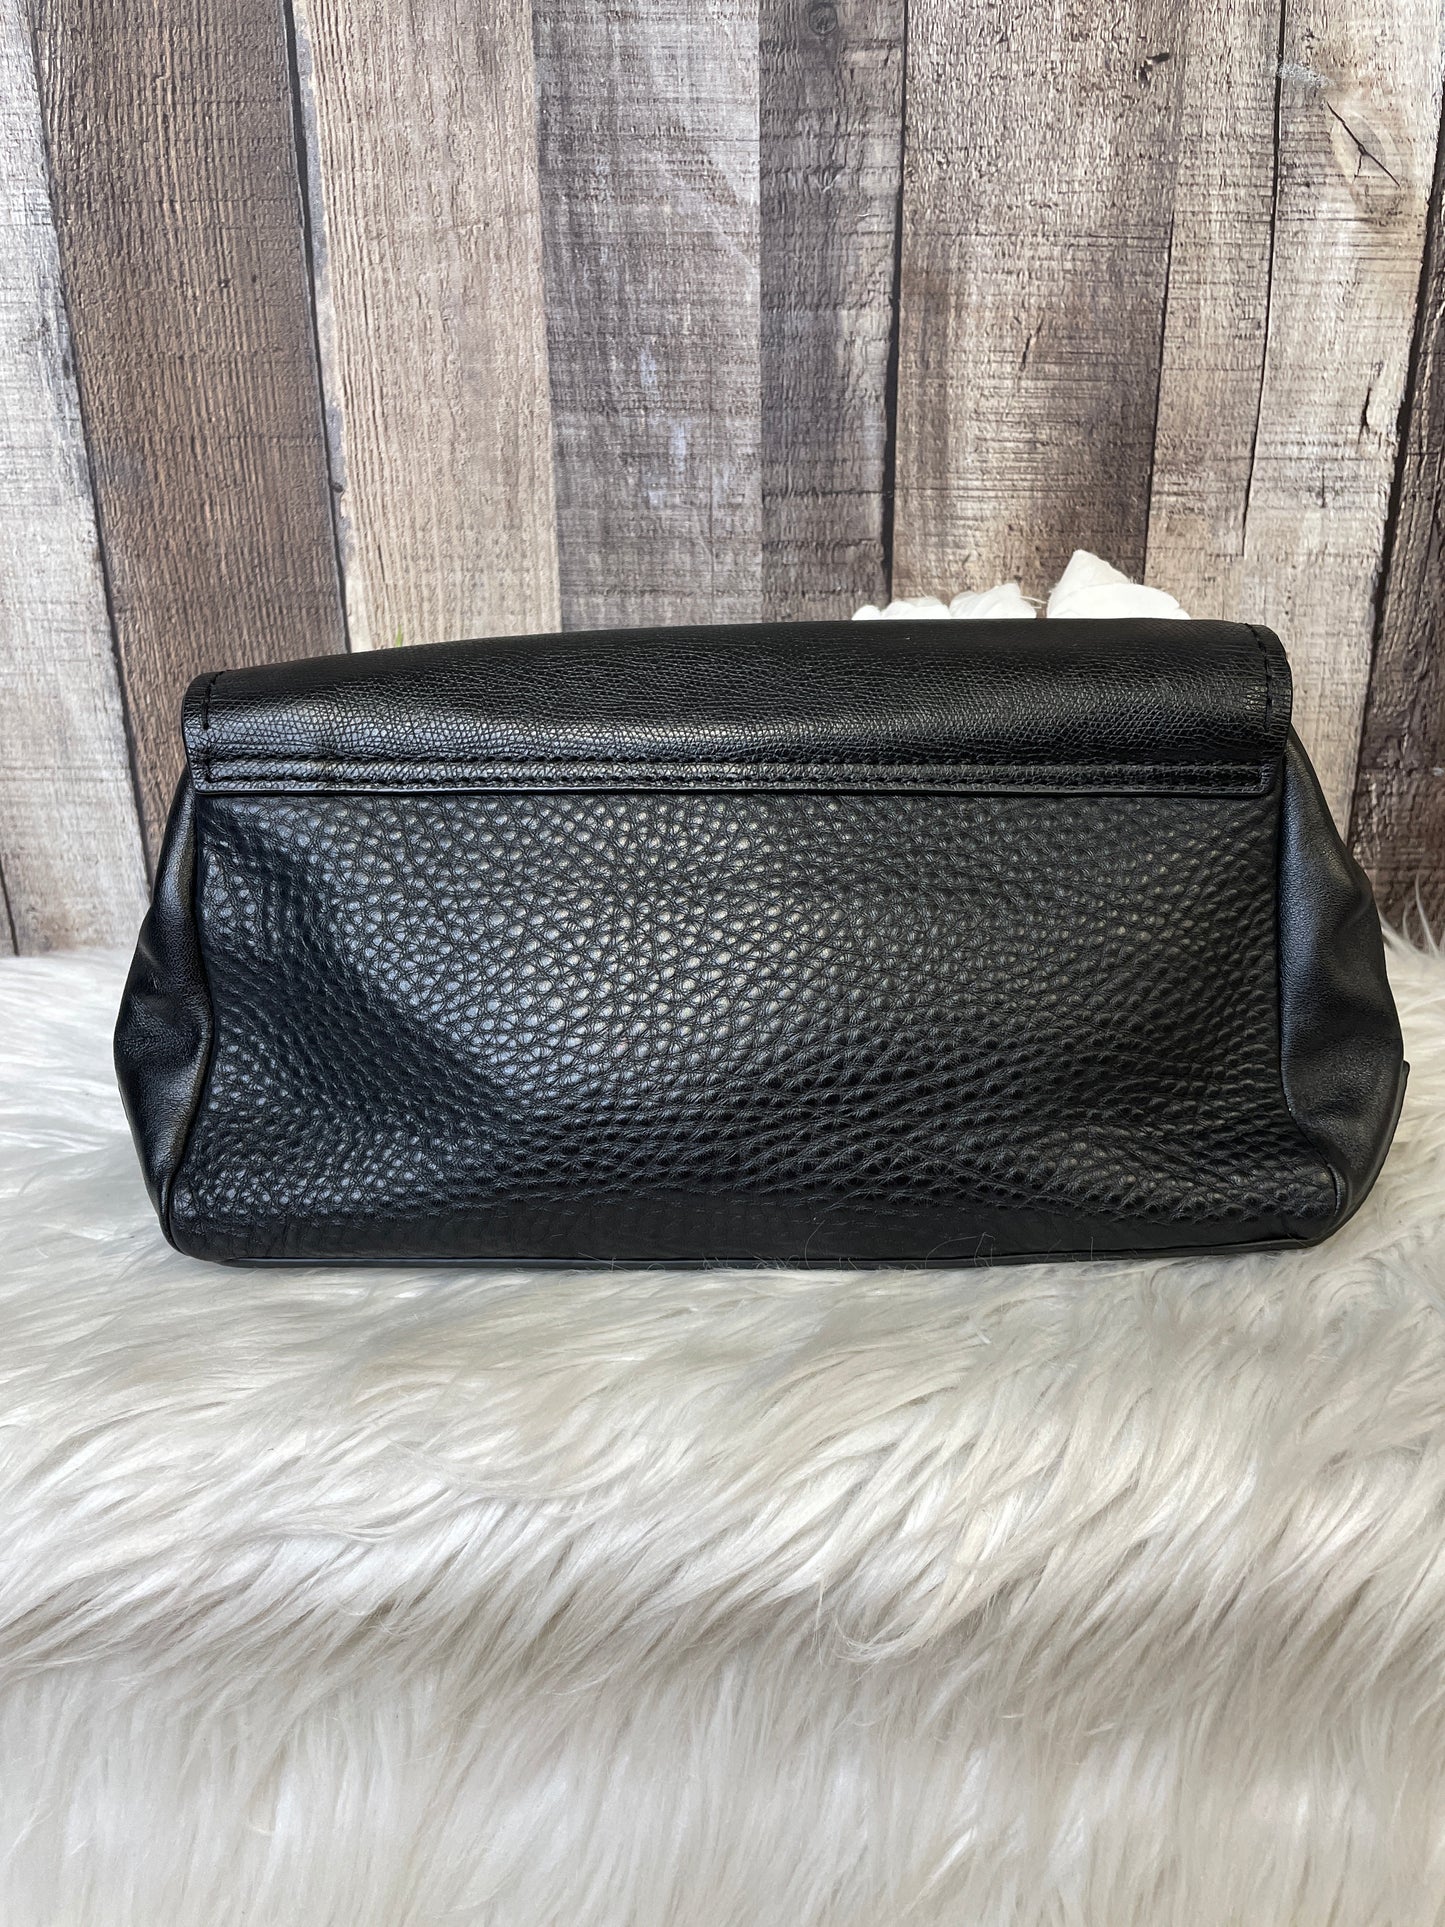 Clutch Designer By Marc By Marc Jacobs  Size: Medium